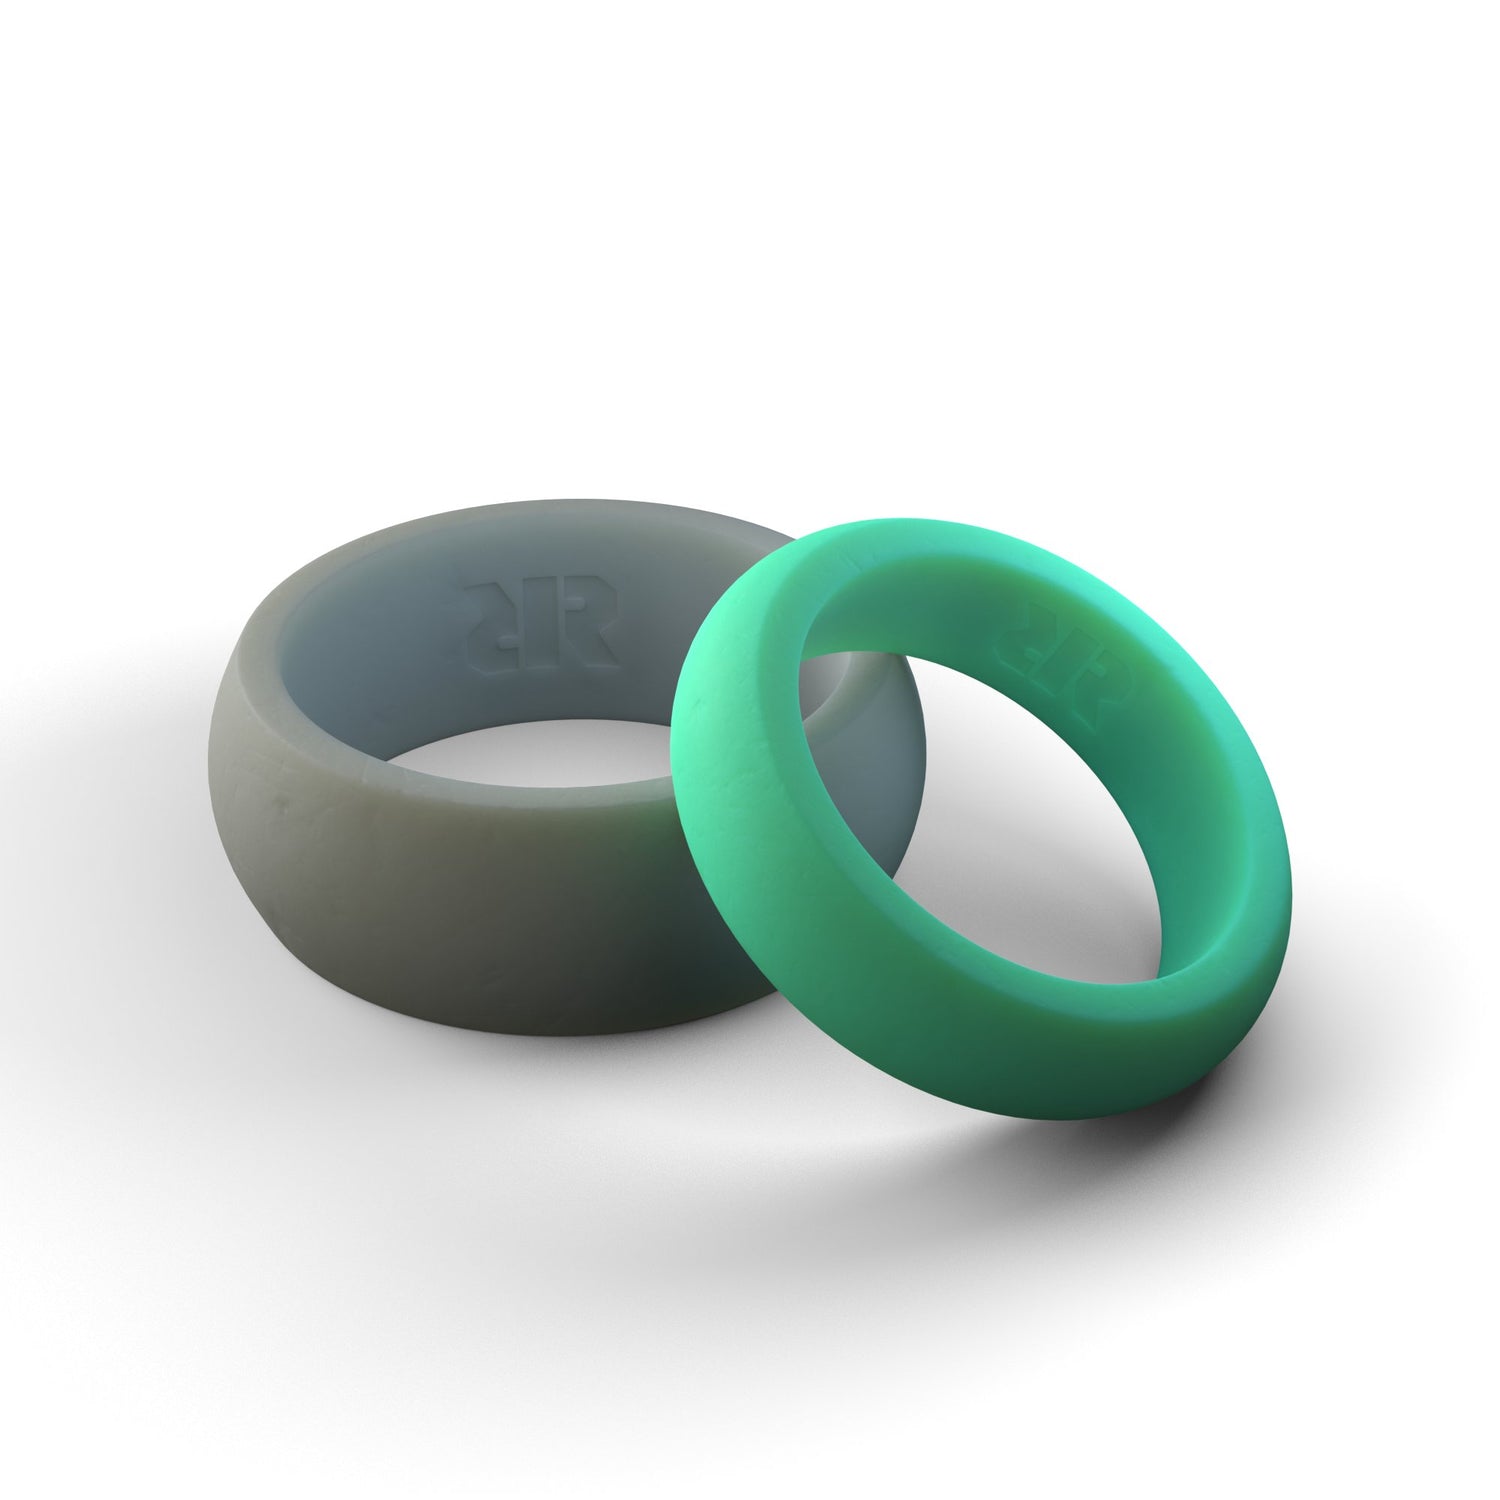 Silicone Wedding Rings